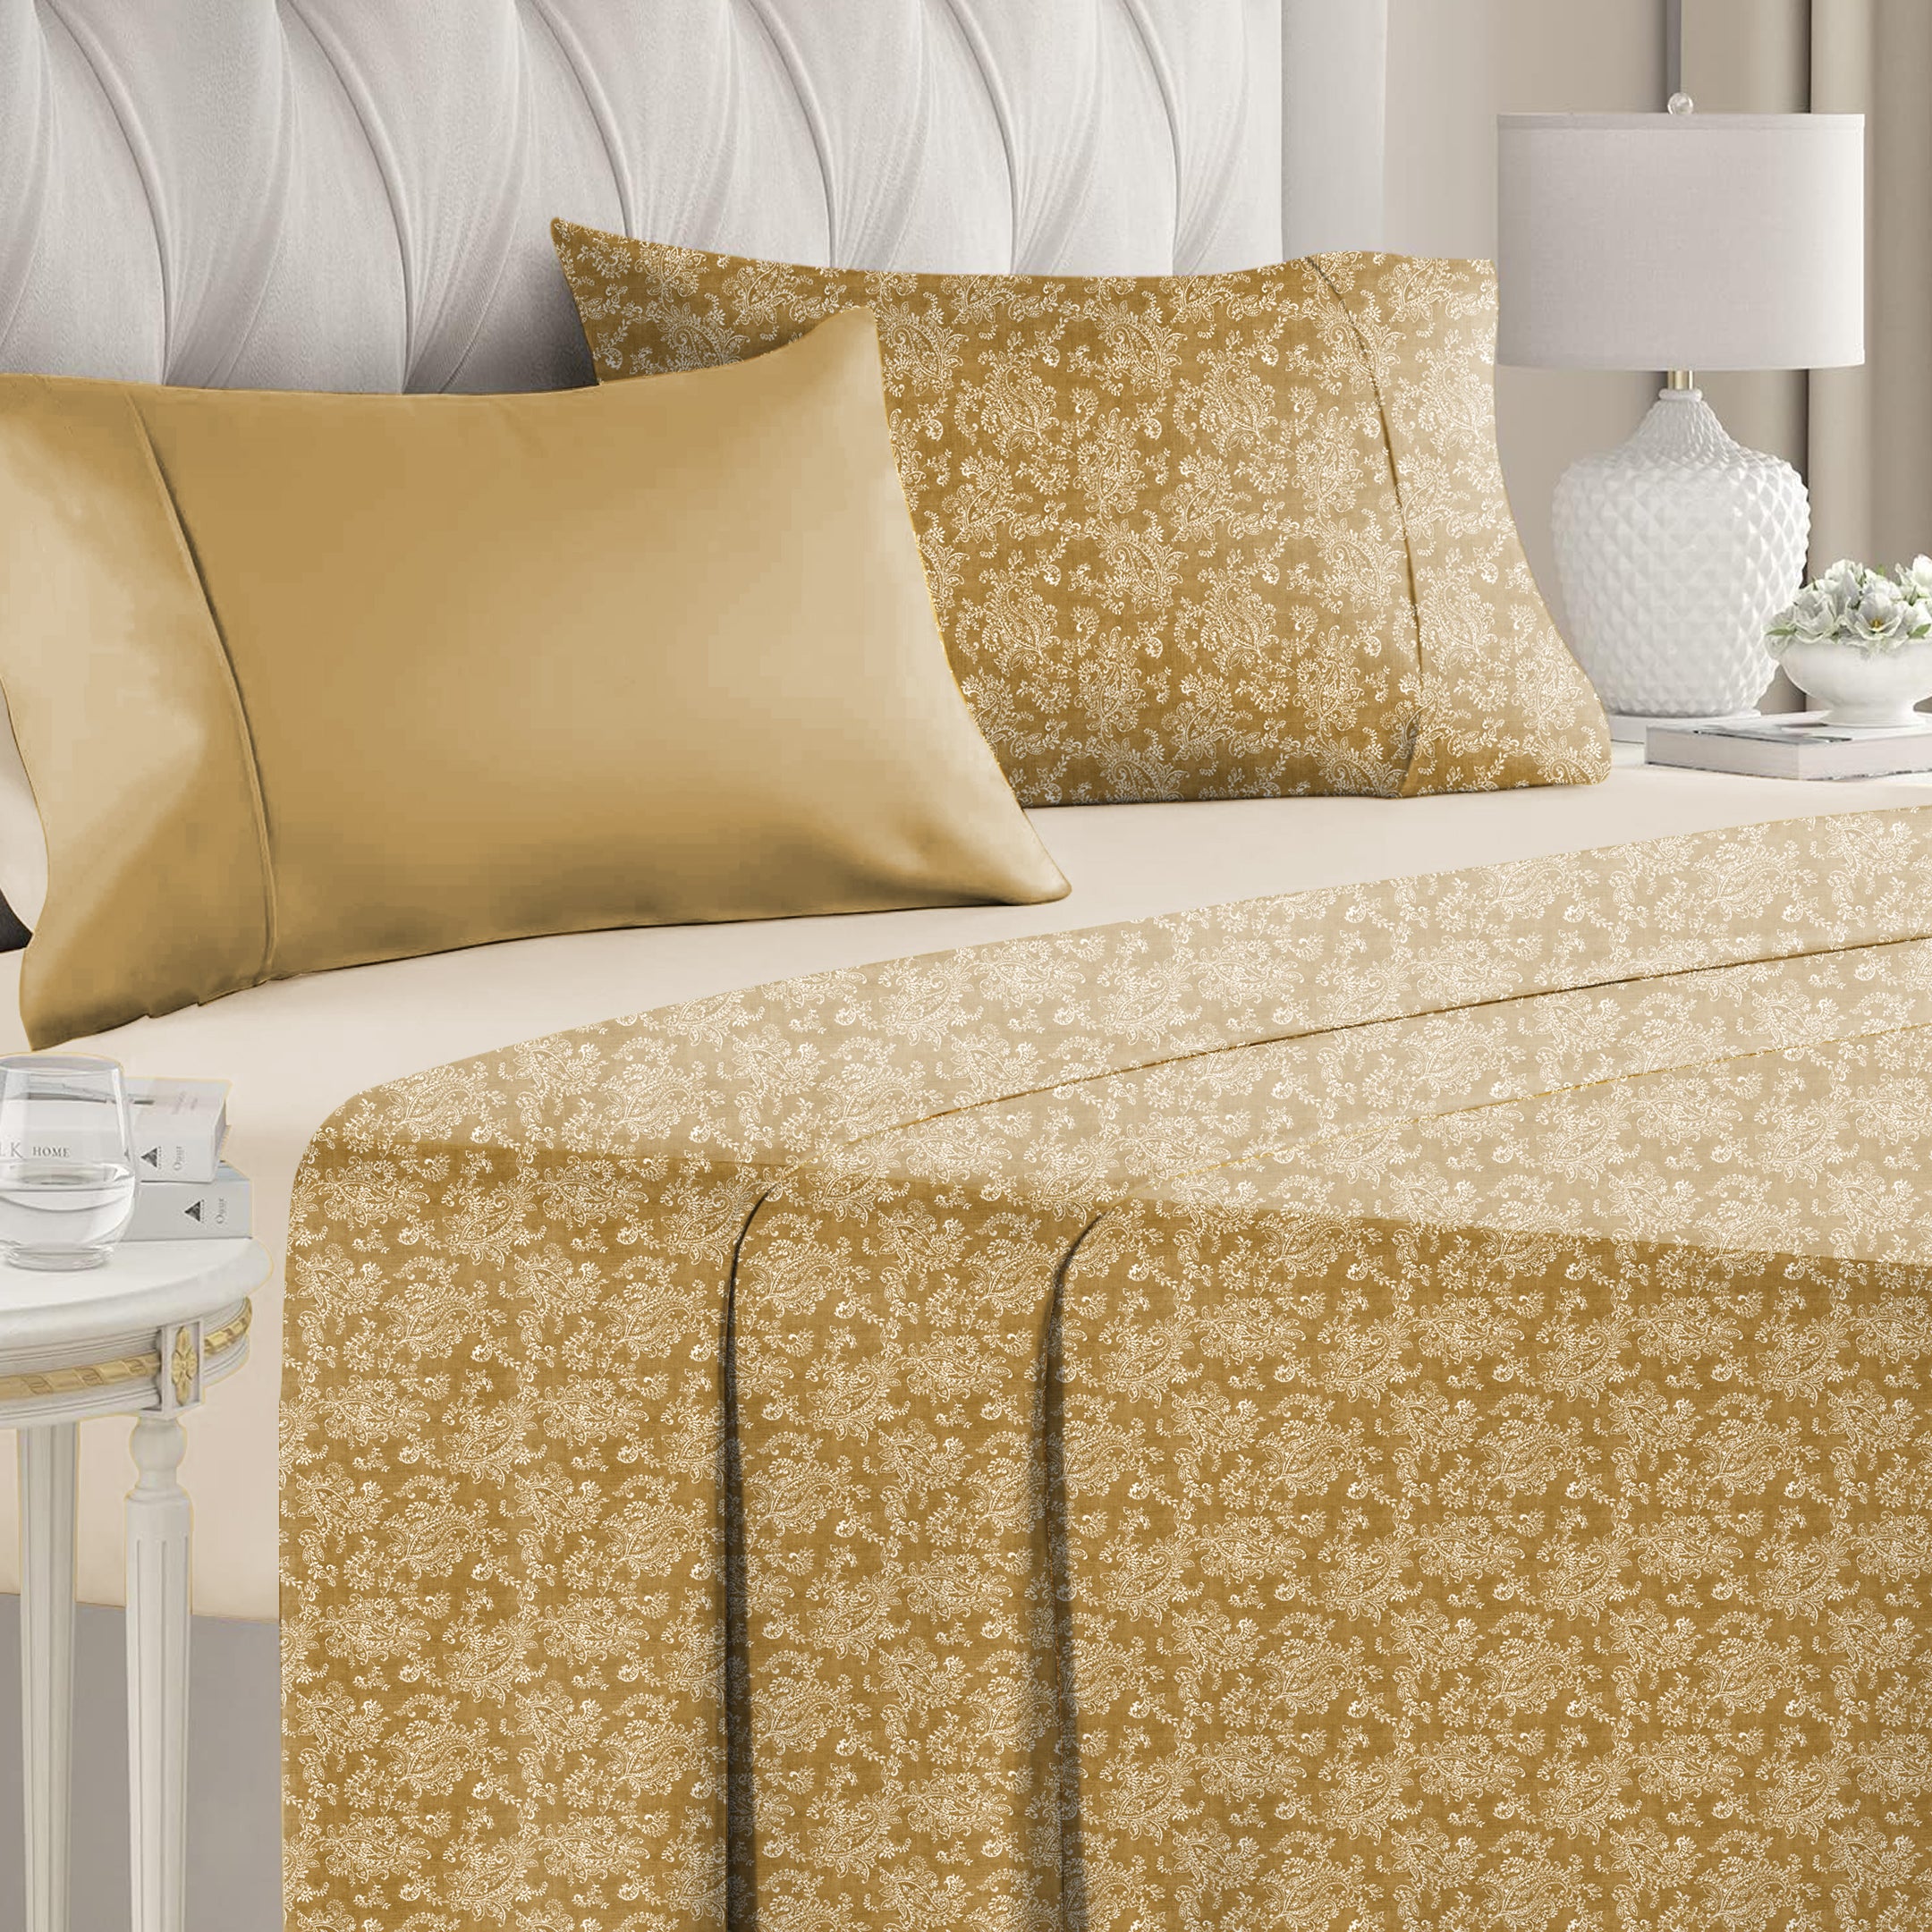 Jodhpur Flowers Bedsheet for Double Bed with 2 PillowCovers King Size (104" X 90") Camel